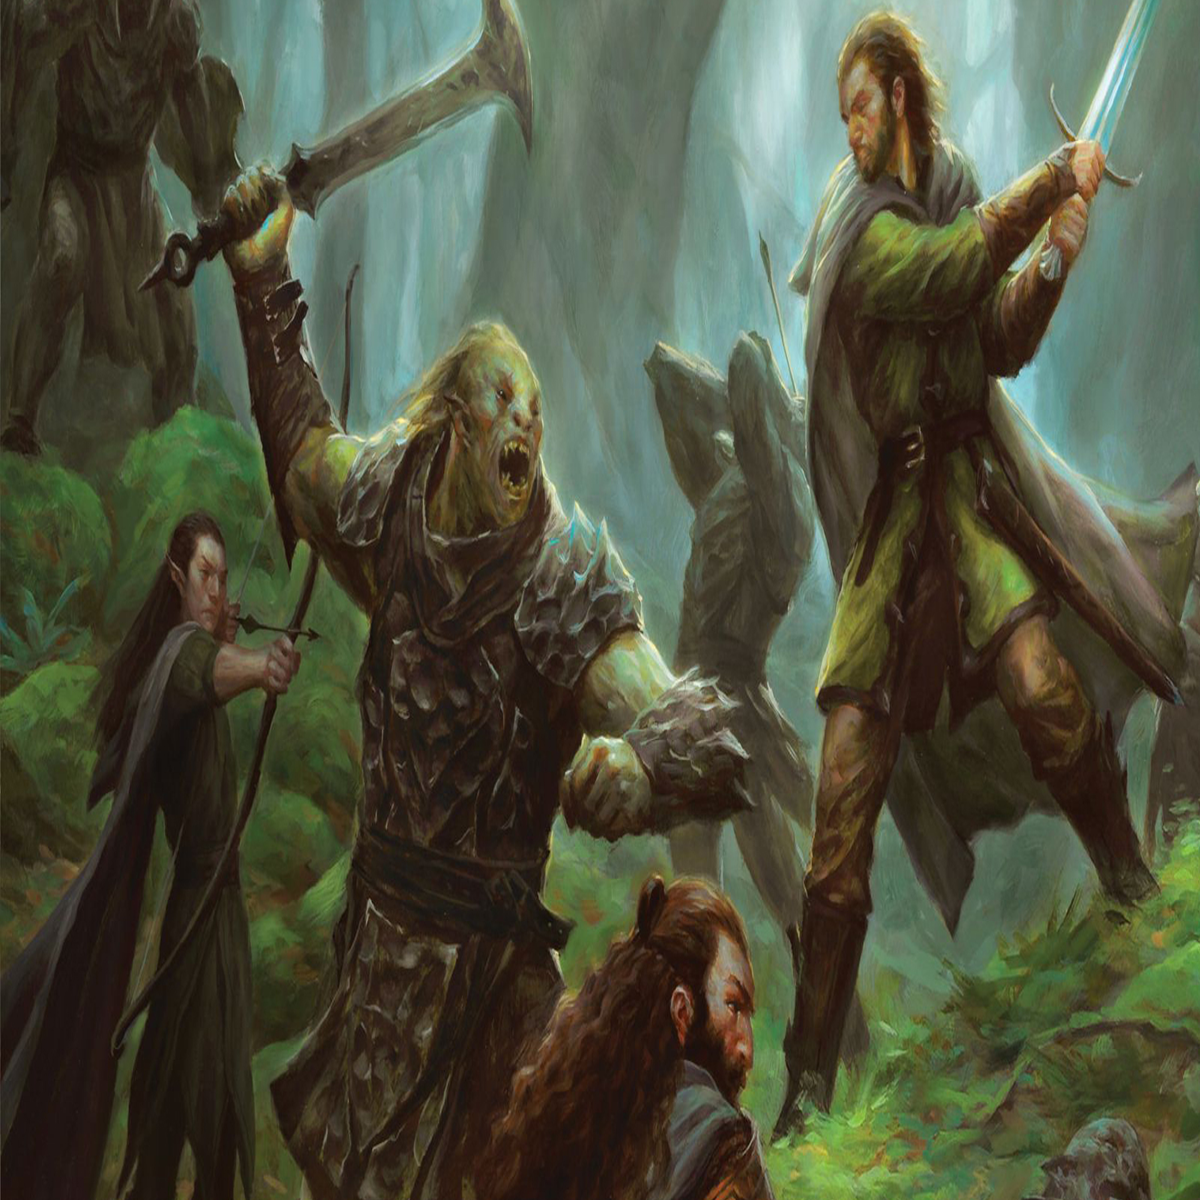 Minas Tirith | The Lord of the Rings: Tales of Middle-earth Variants |  Modern | Card Kingdom